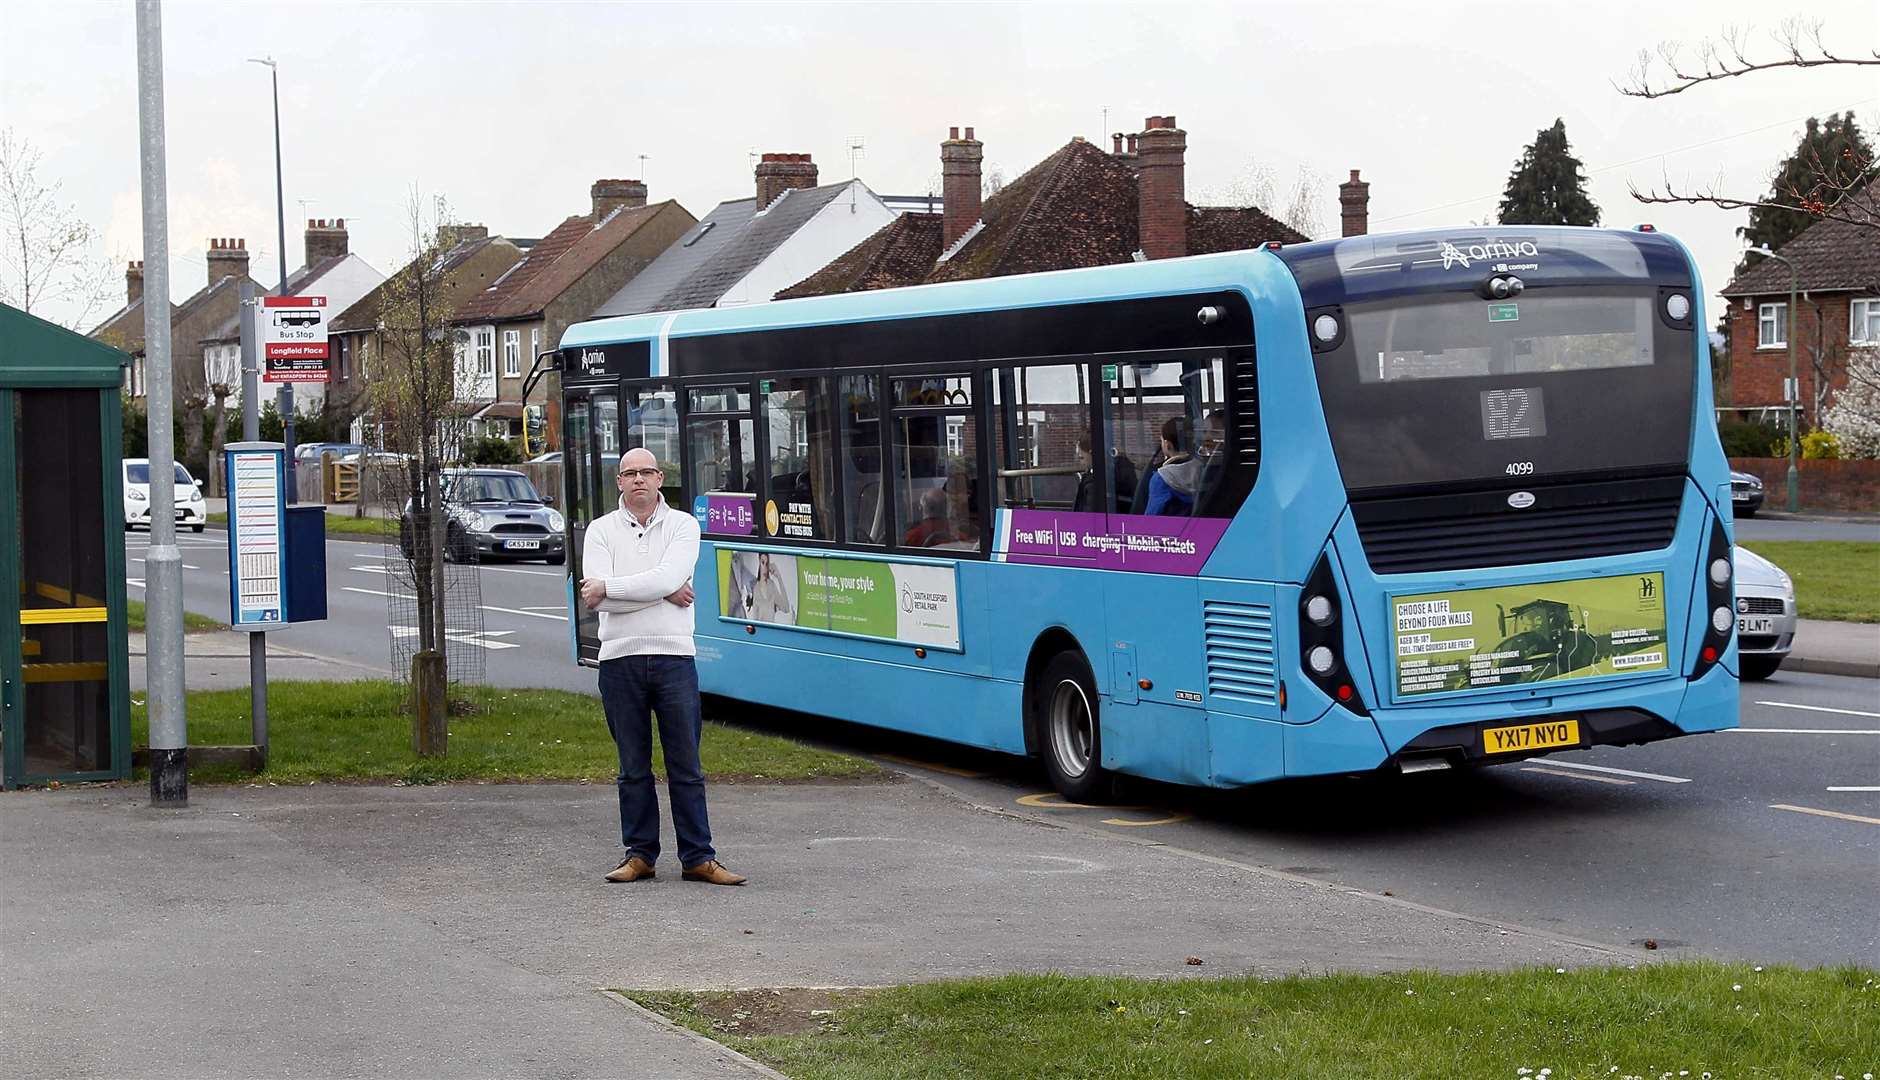 Paul Routley claims buses stop outside his home for long periods with their engines running